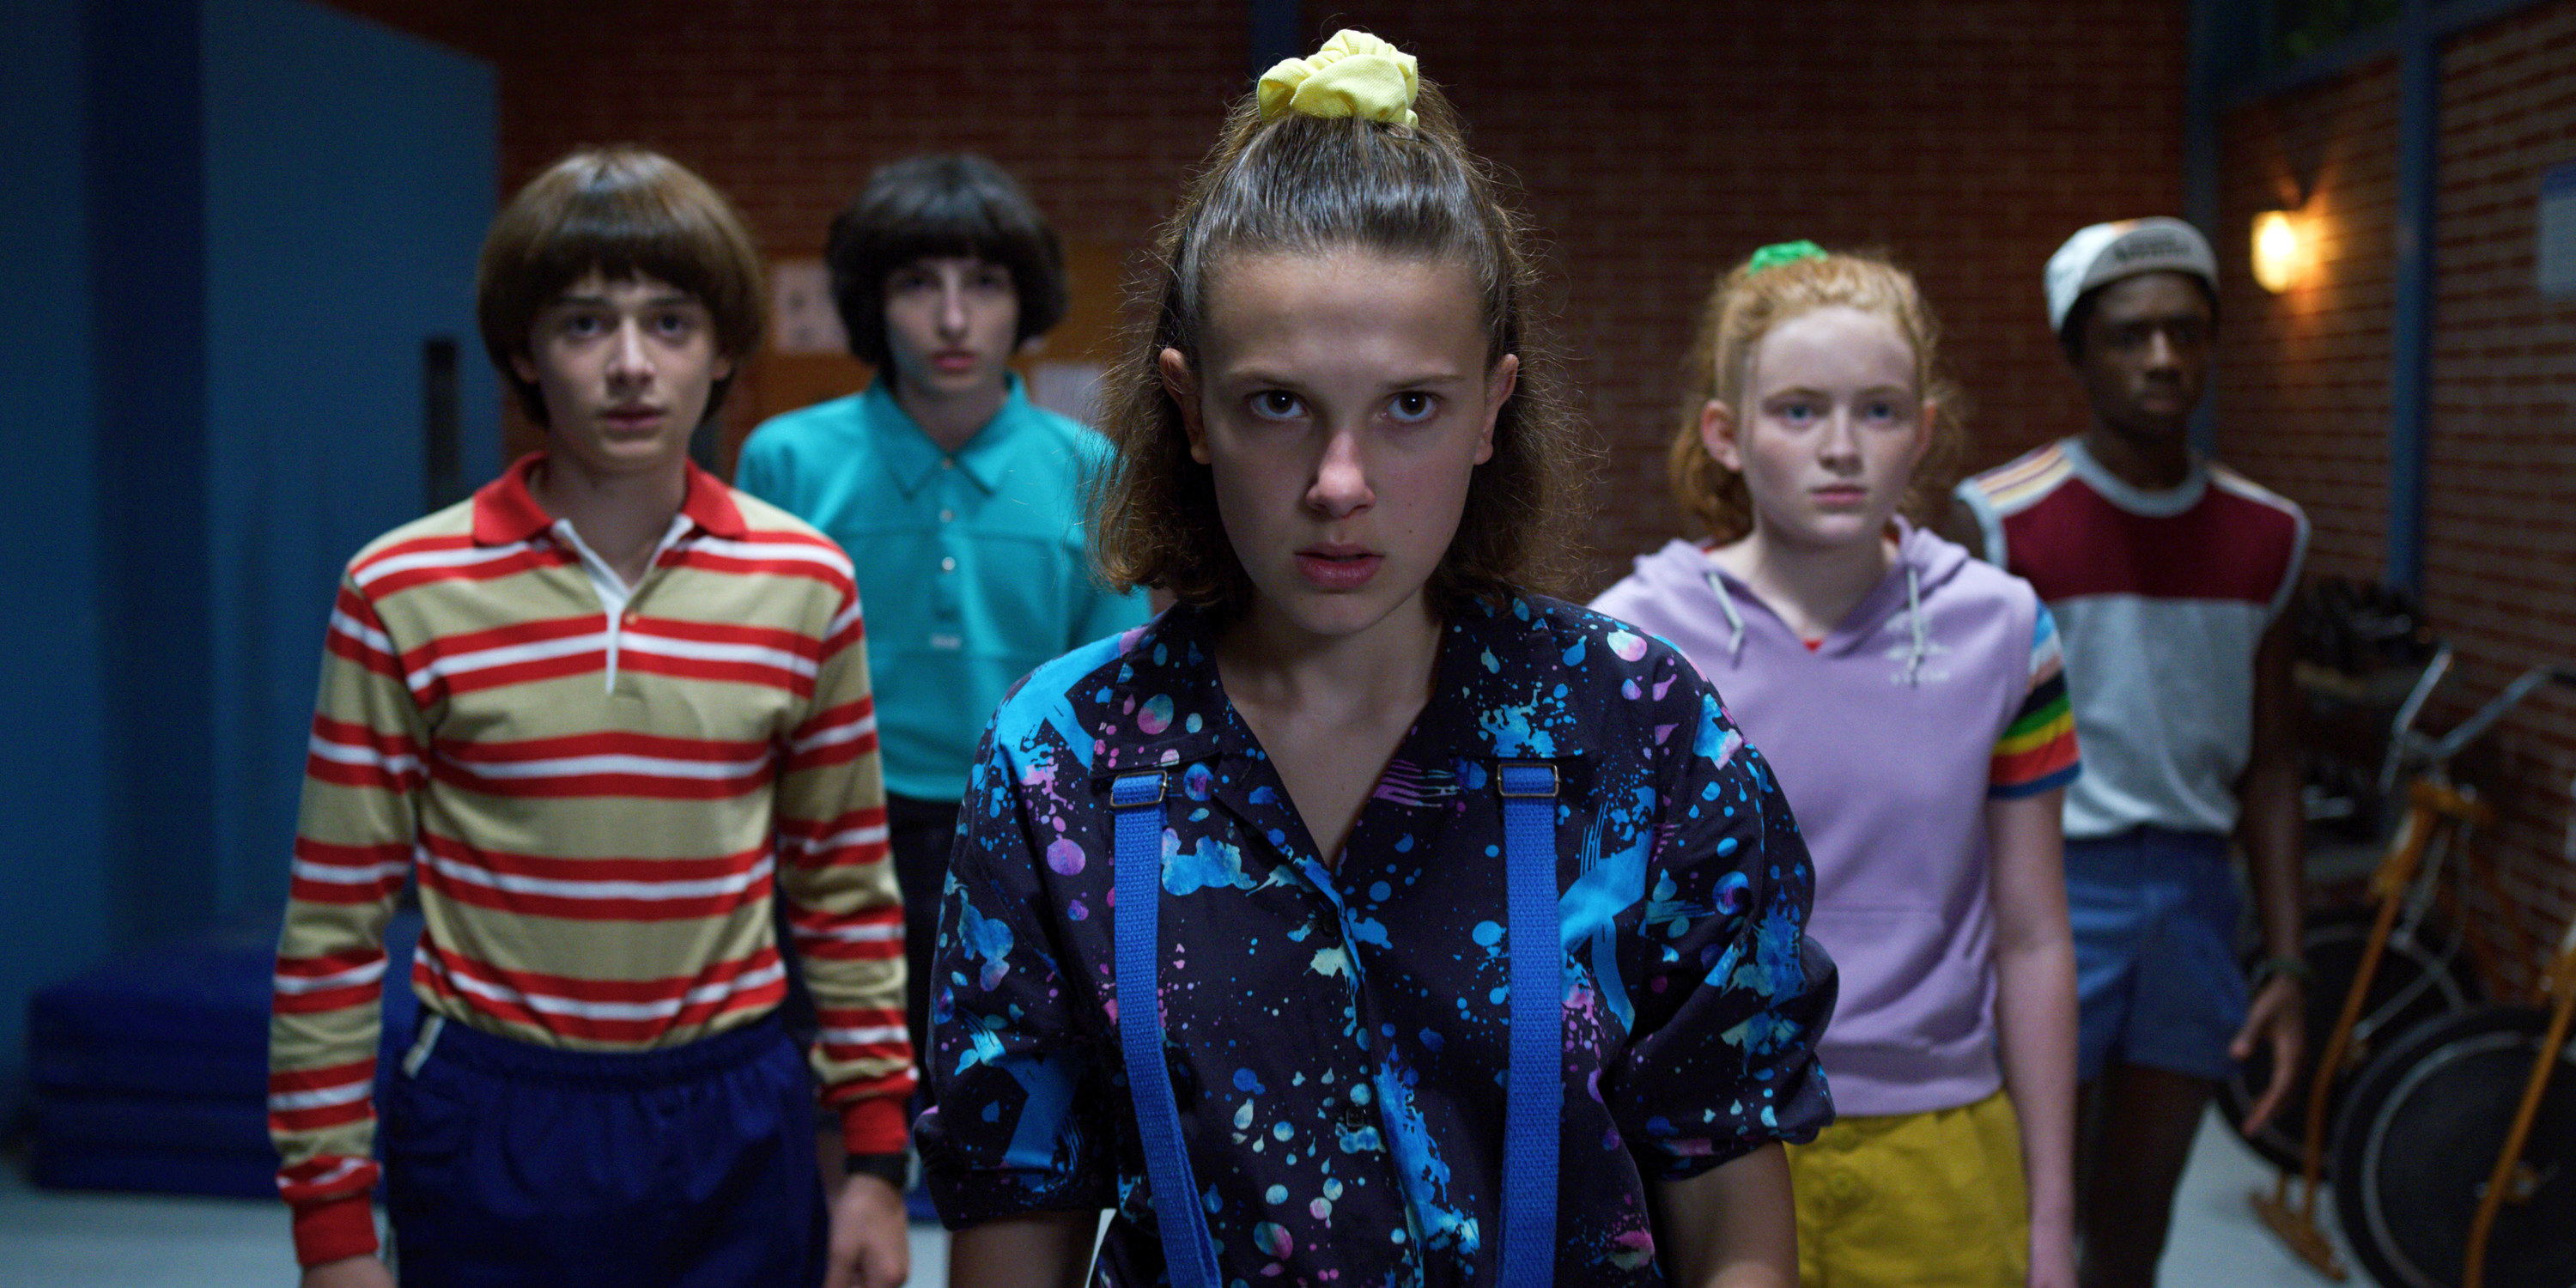 Various cast members, including Millie Bobby Brown as Eleven in front, standing together